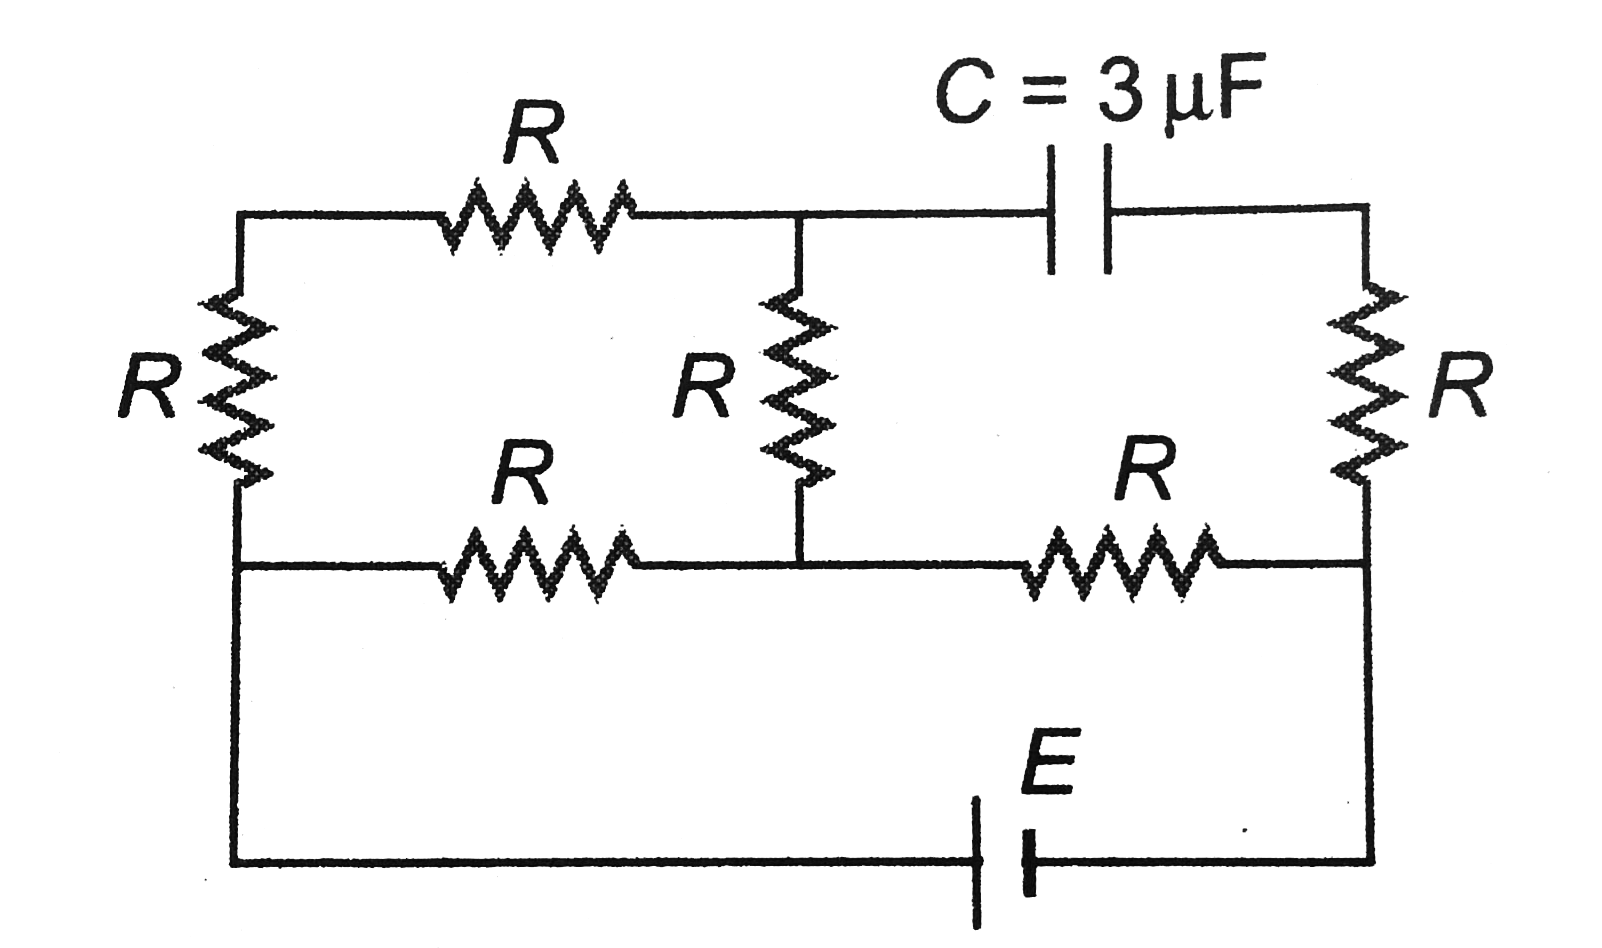 In the circuit the potential difference across the capacitor is 10 V. Each resistance is of 3Omega The cell is ideal. The emf of the cell is